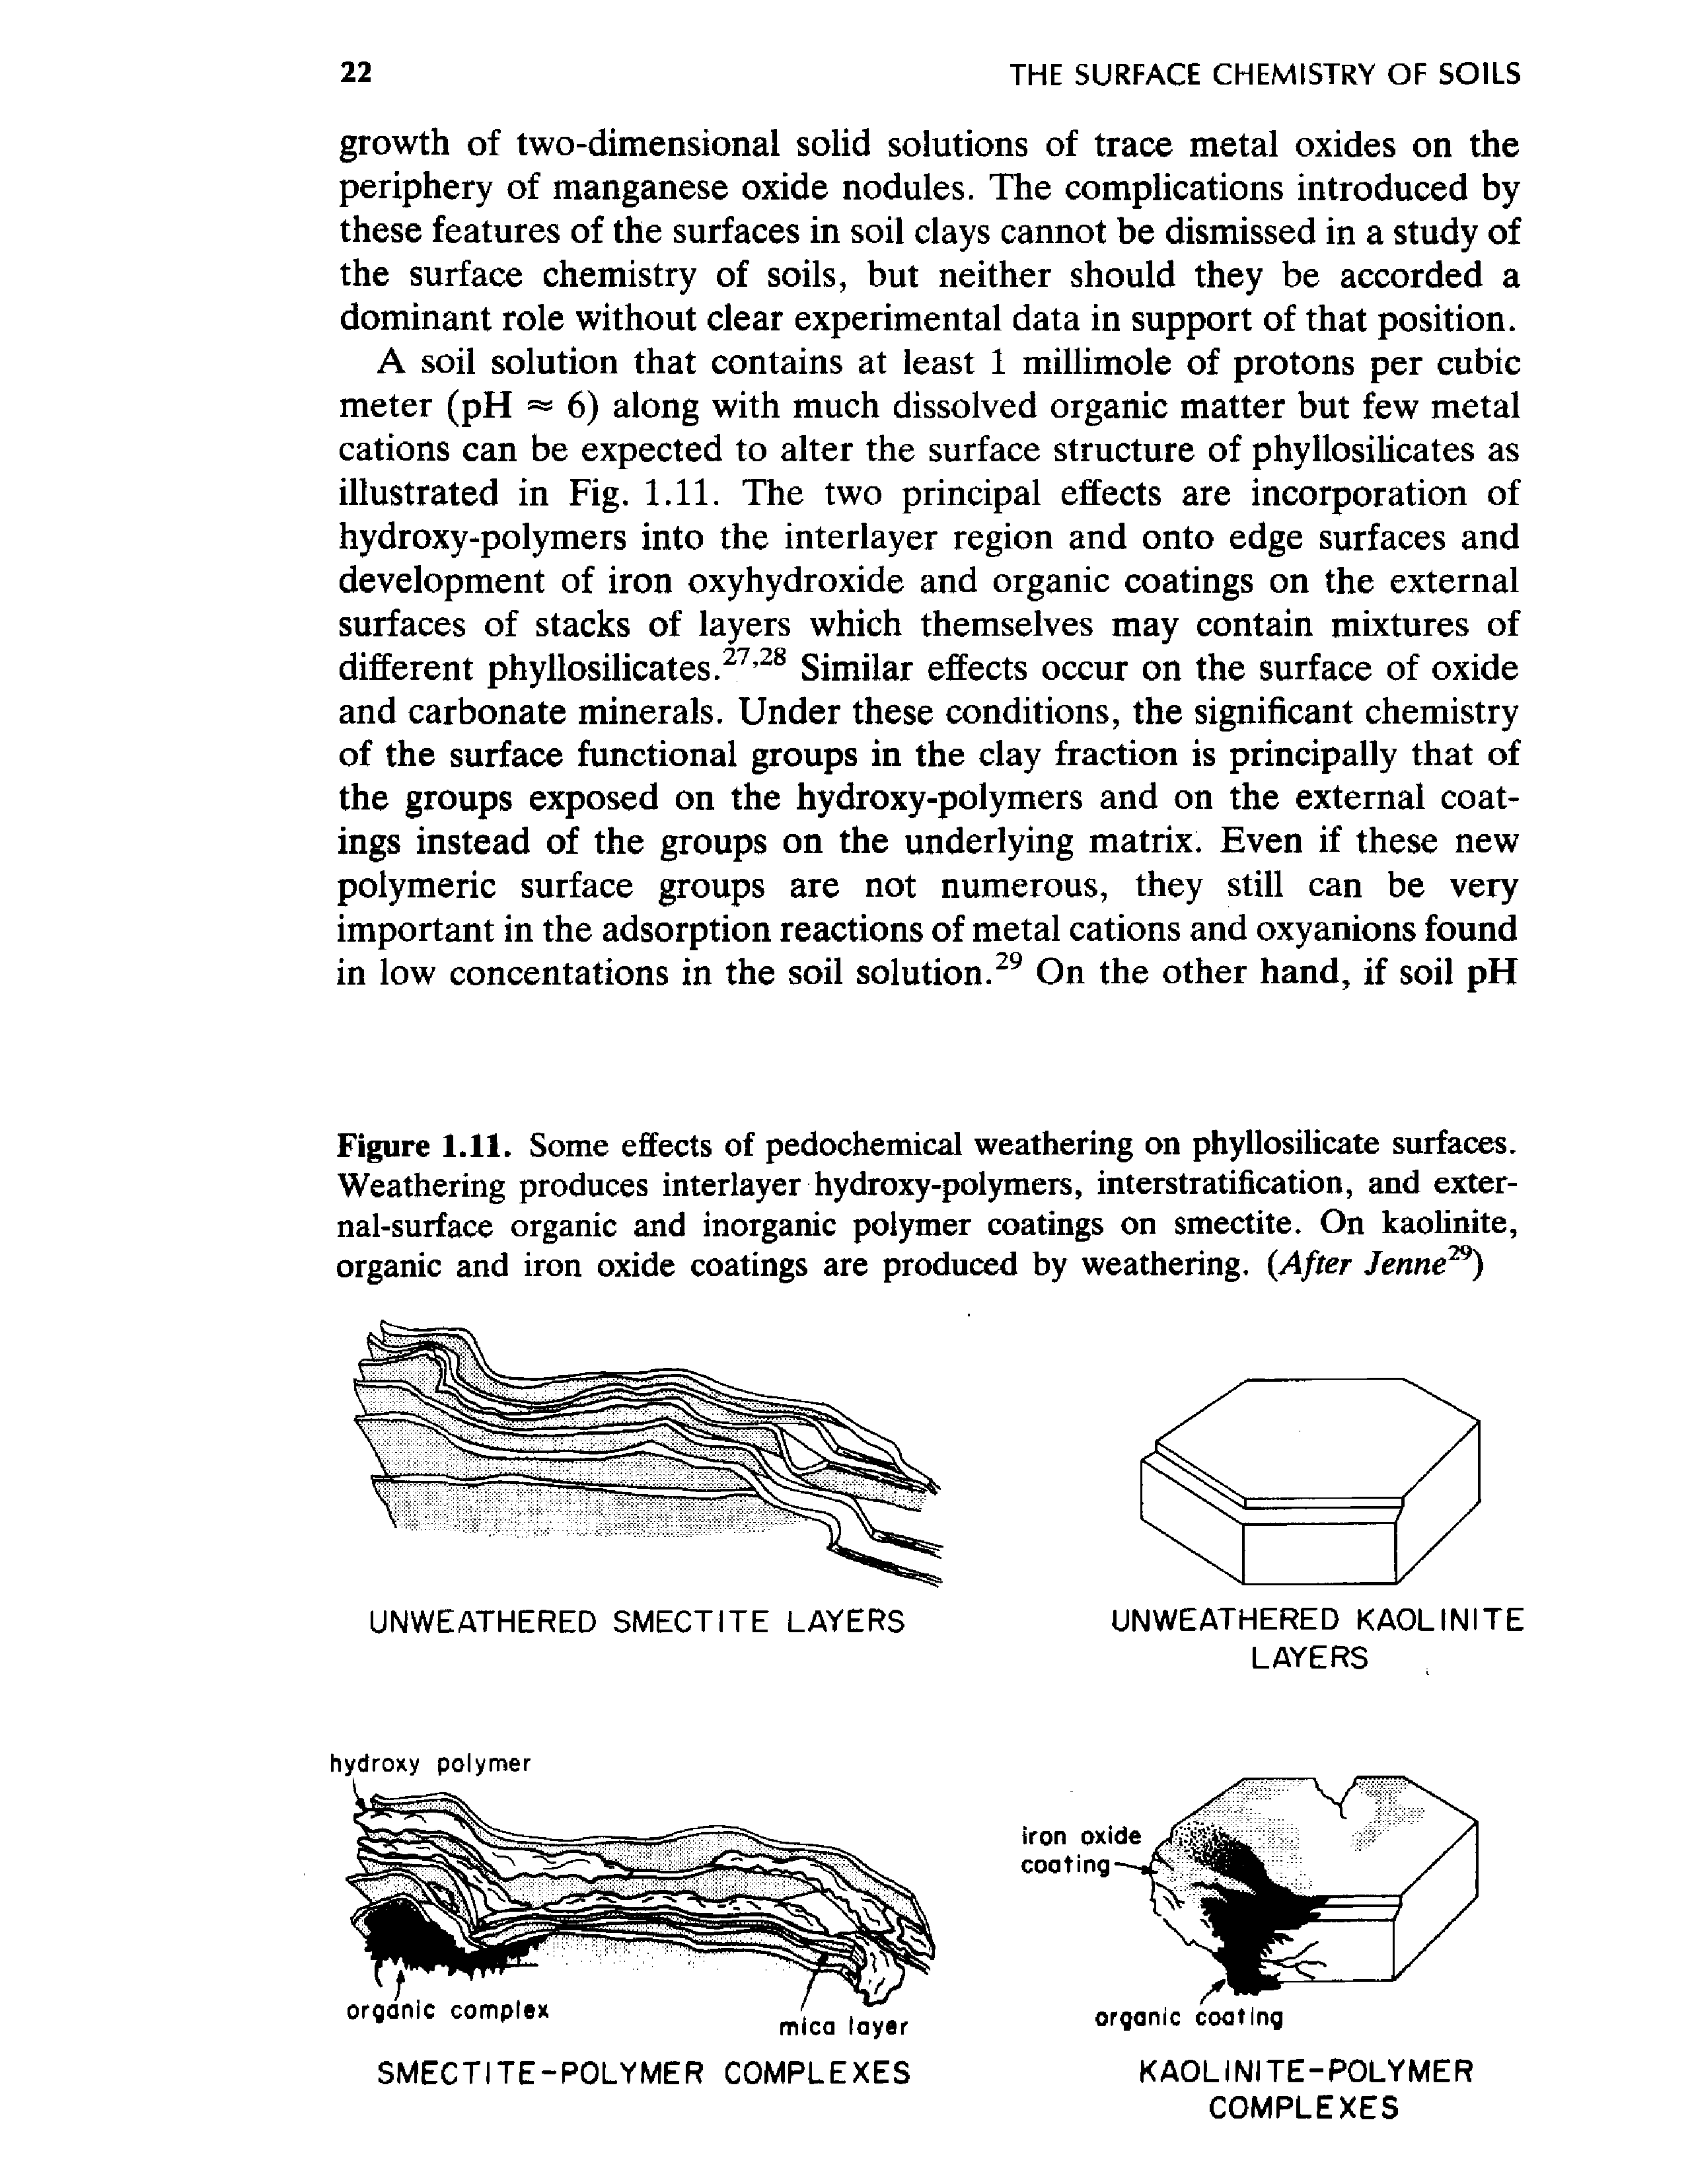 Figure 1.11. Some effects of pedochemical weathering on phyllosilicate surfaces. Weathering produces interlayer hydroxy-polymers, interstratification, and external-surface organic and inorganic polymer coatings on smectite. On kaolinite, organic and iron oxide coatings are produced by weathering. After Jenne ...